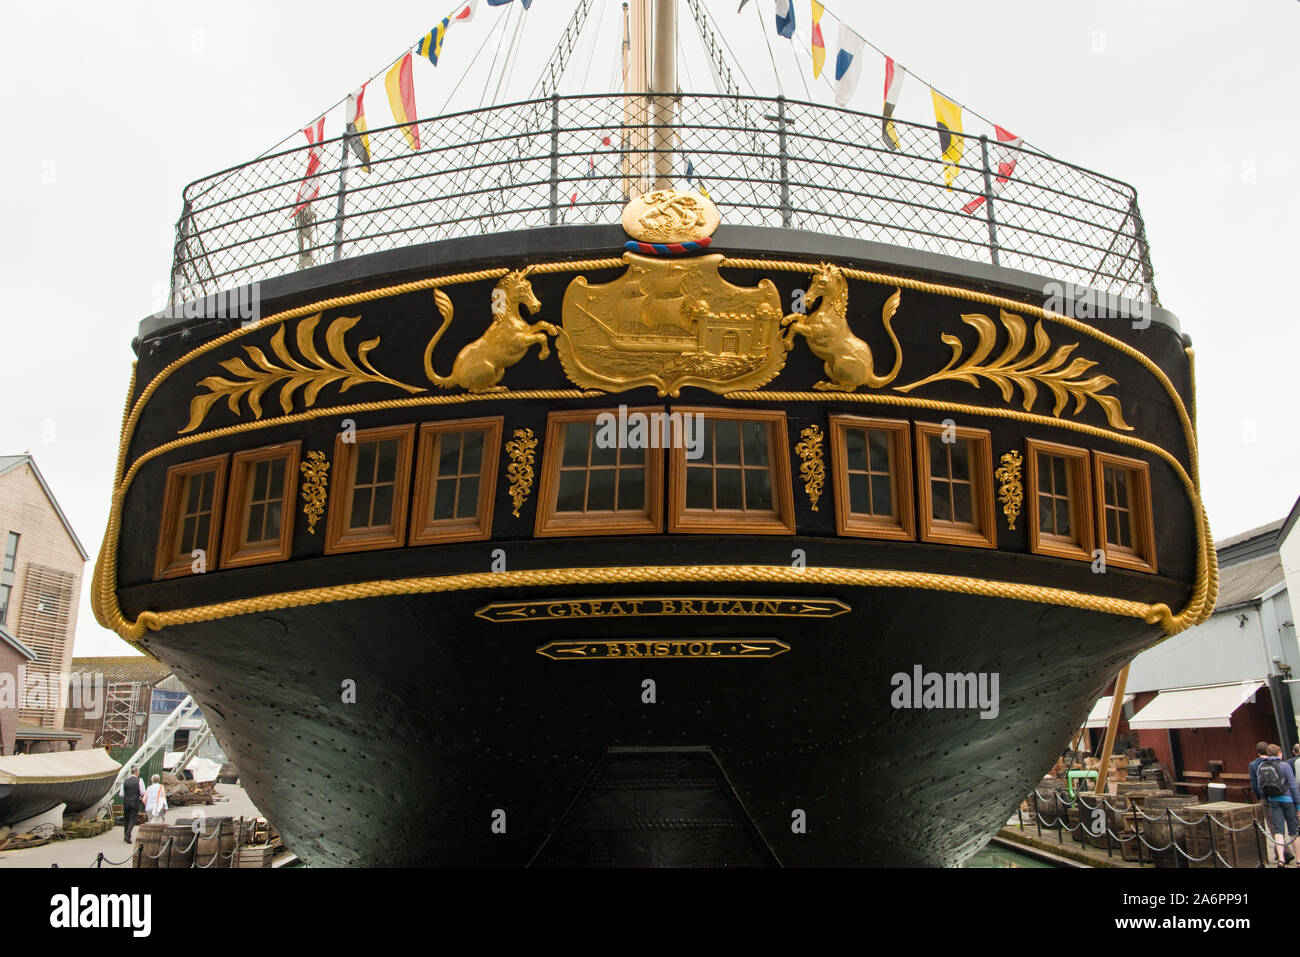 SS Great Britain steamship museum Stock Photo